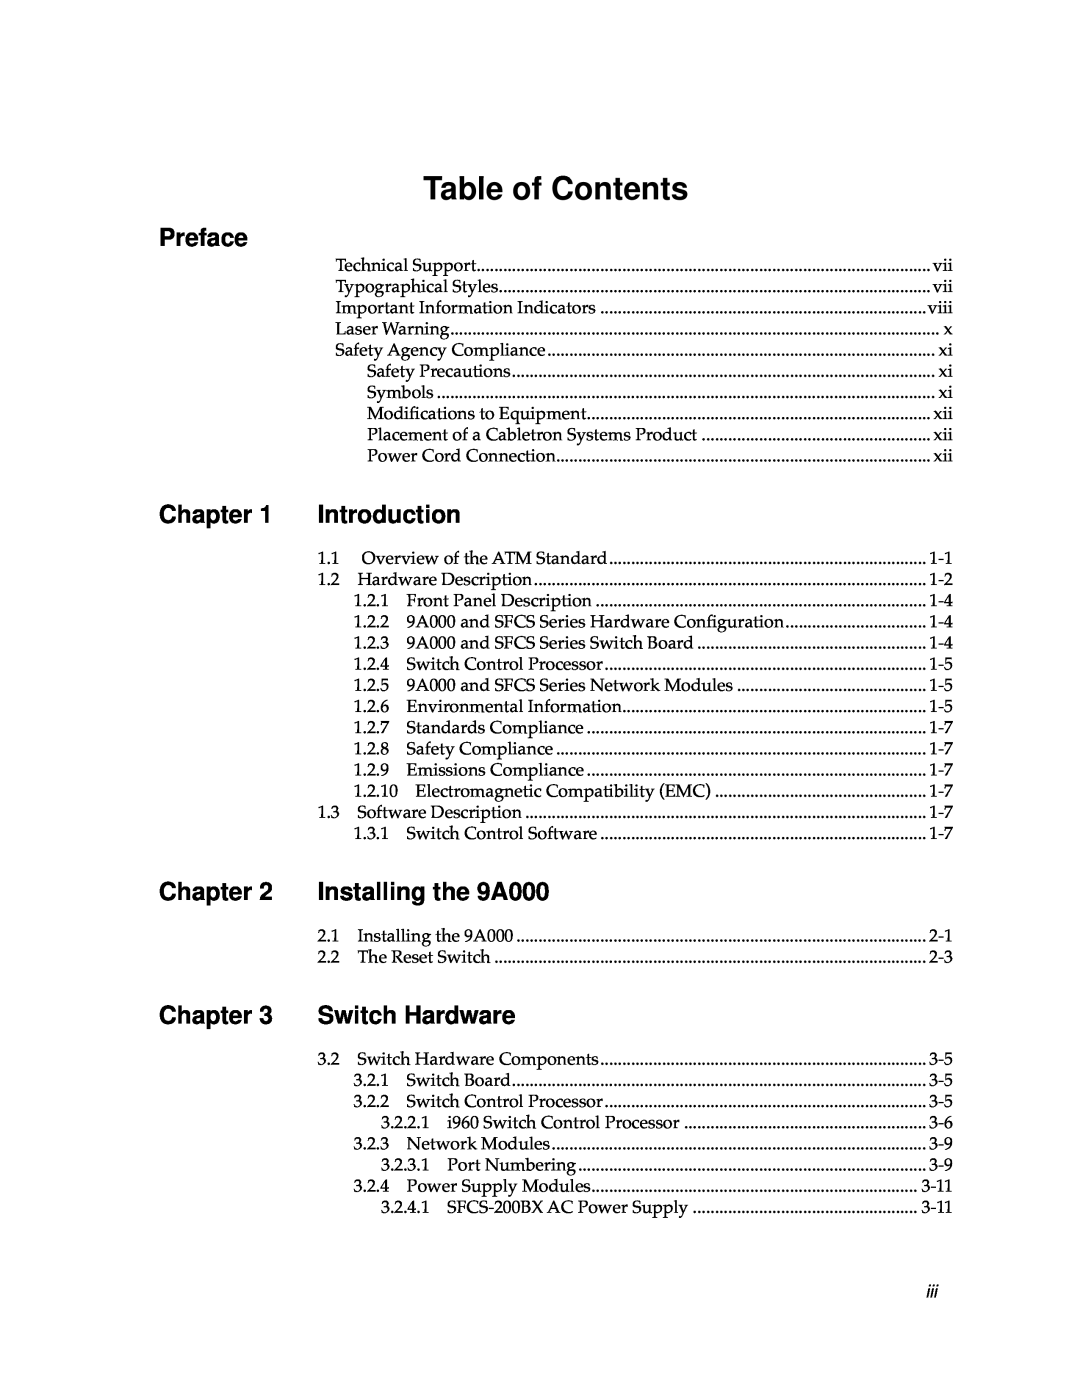 Cabletron Systems manual Table of Contents, Preface, Chapter, Introduction, Installing the 9A000, Switch Hardware 